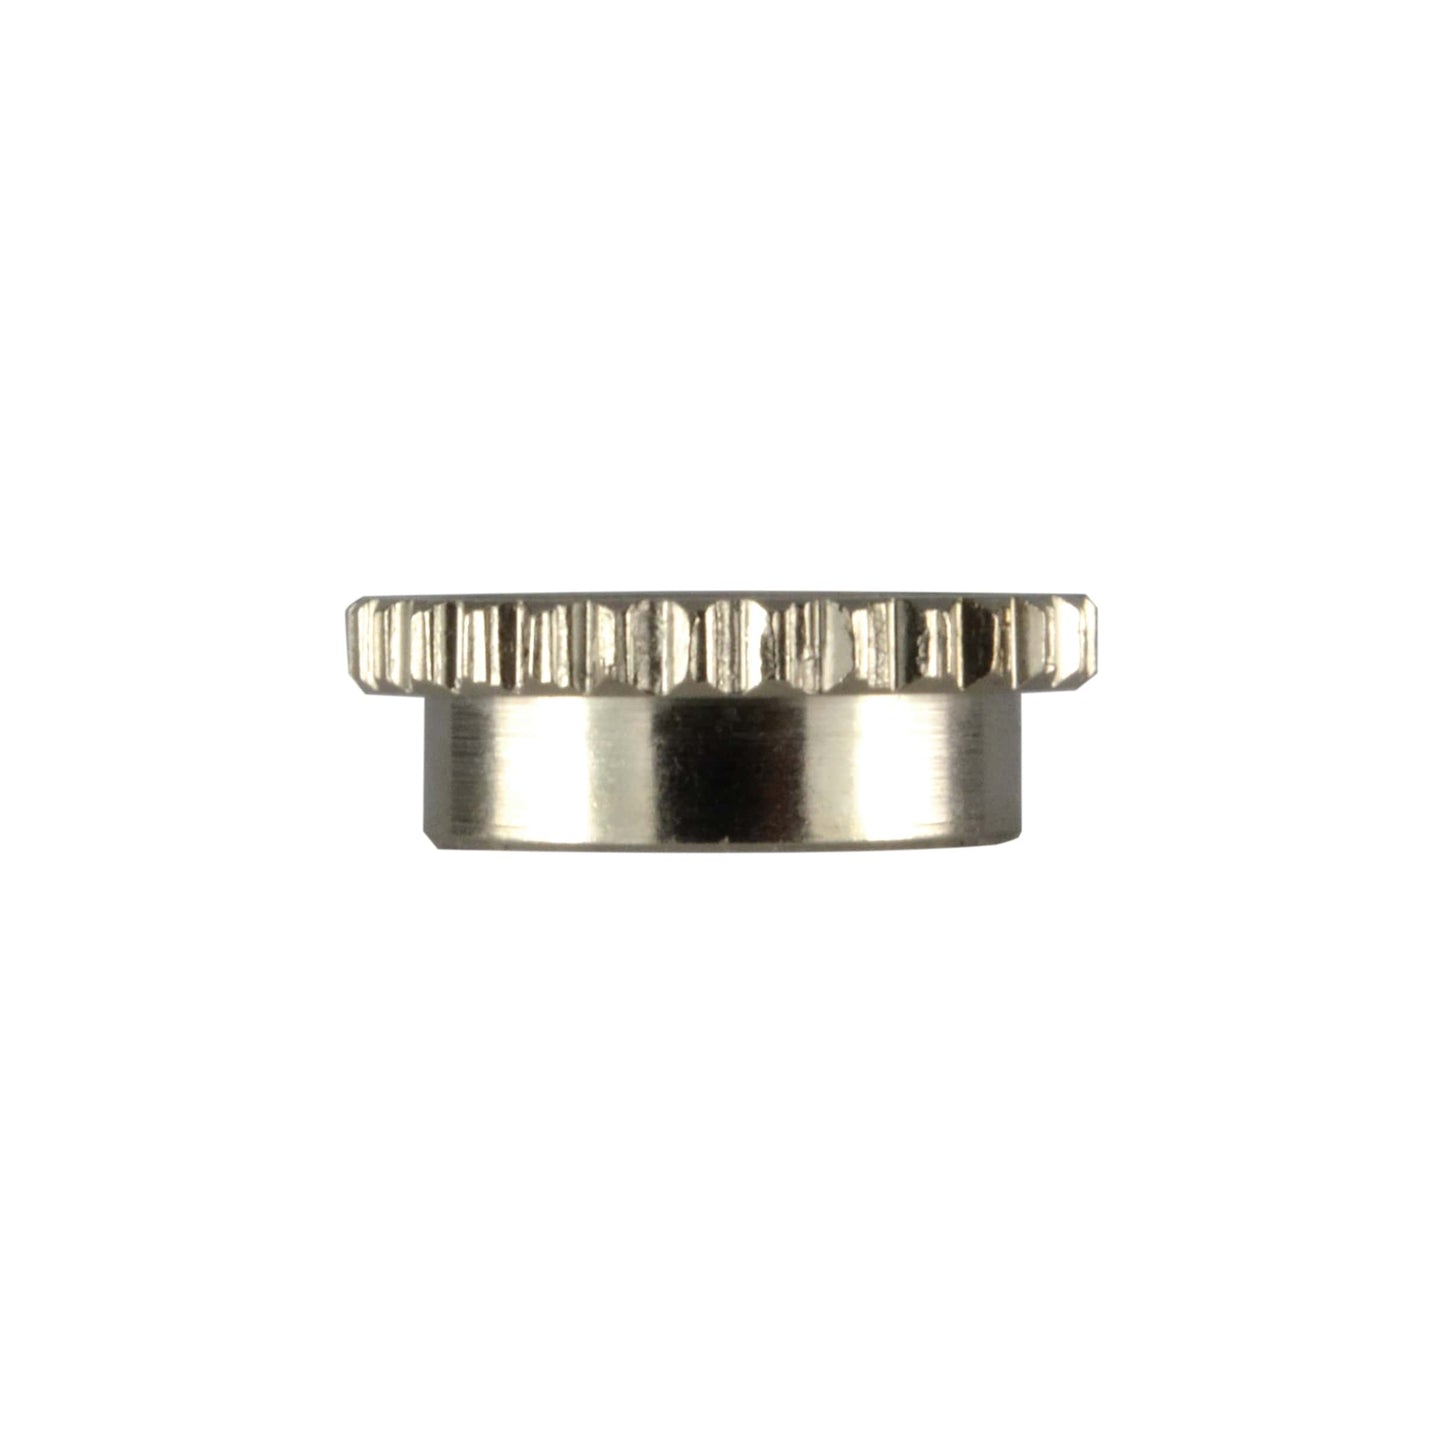 Deep Knurled Nut For 3 Way Toggle